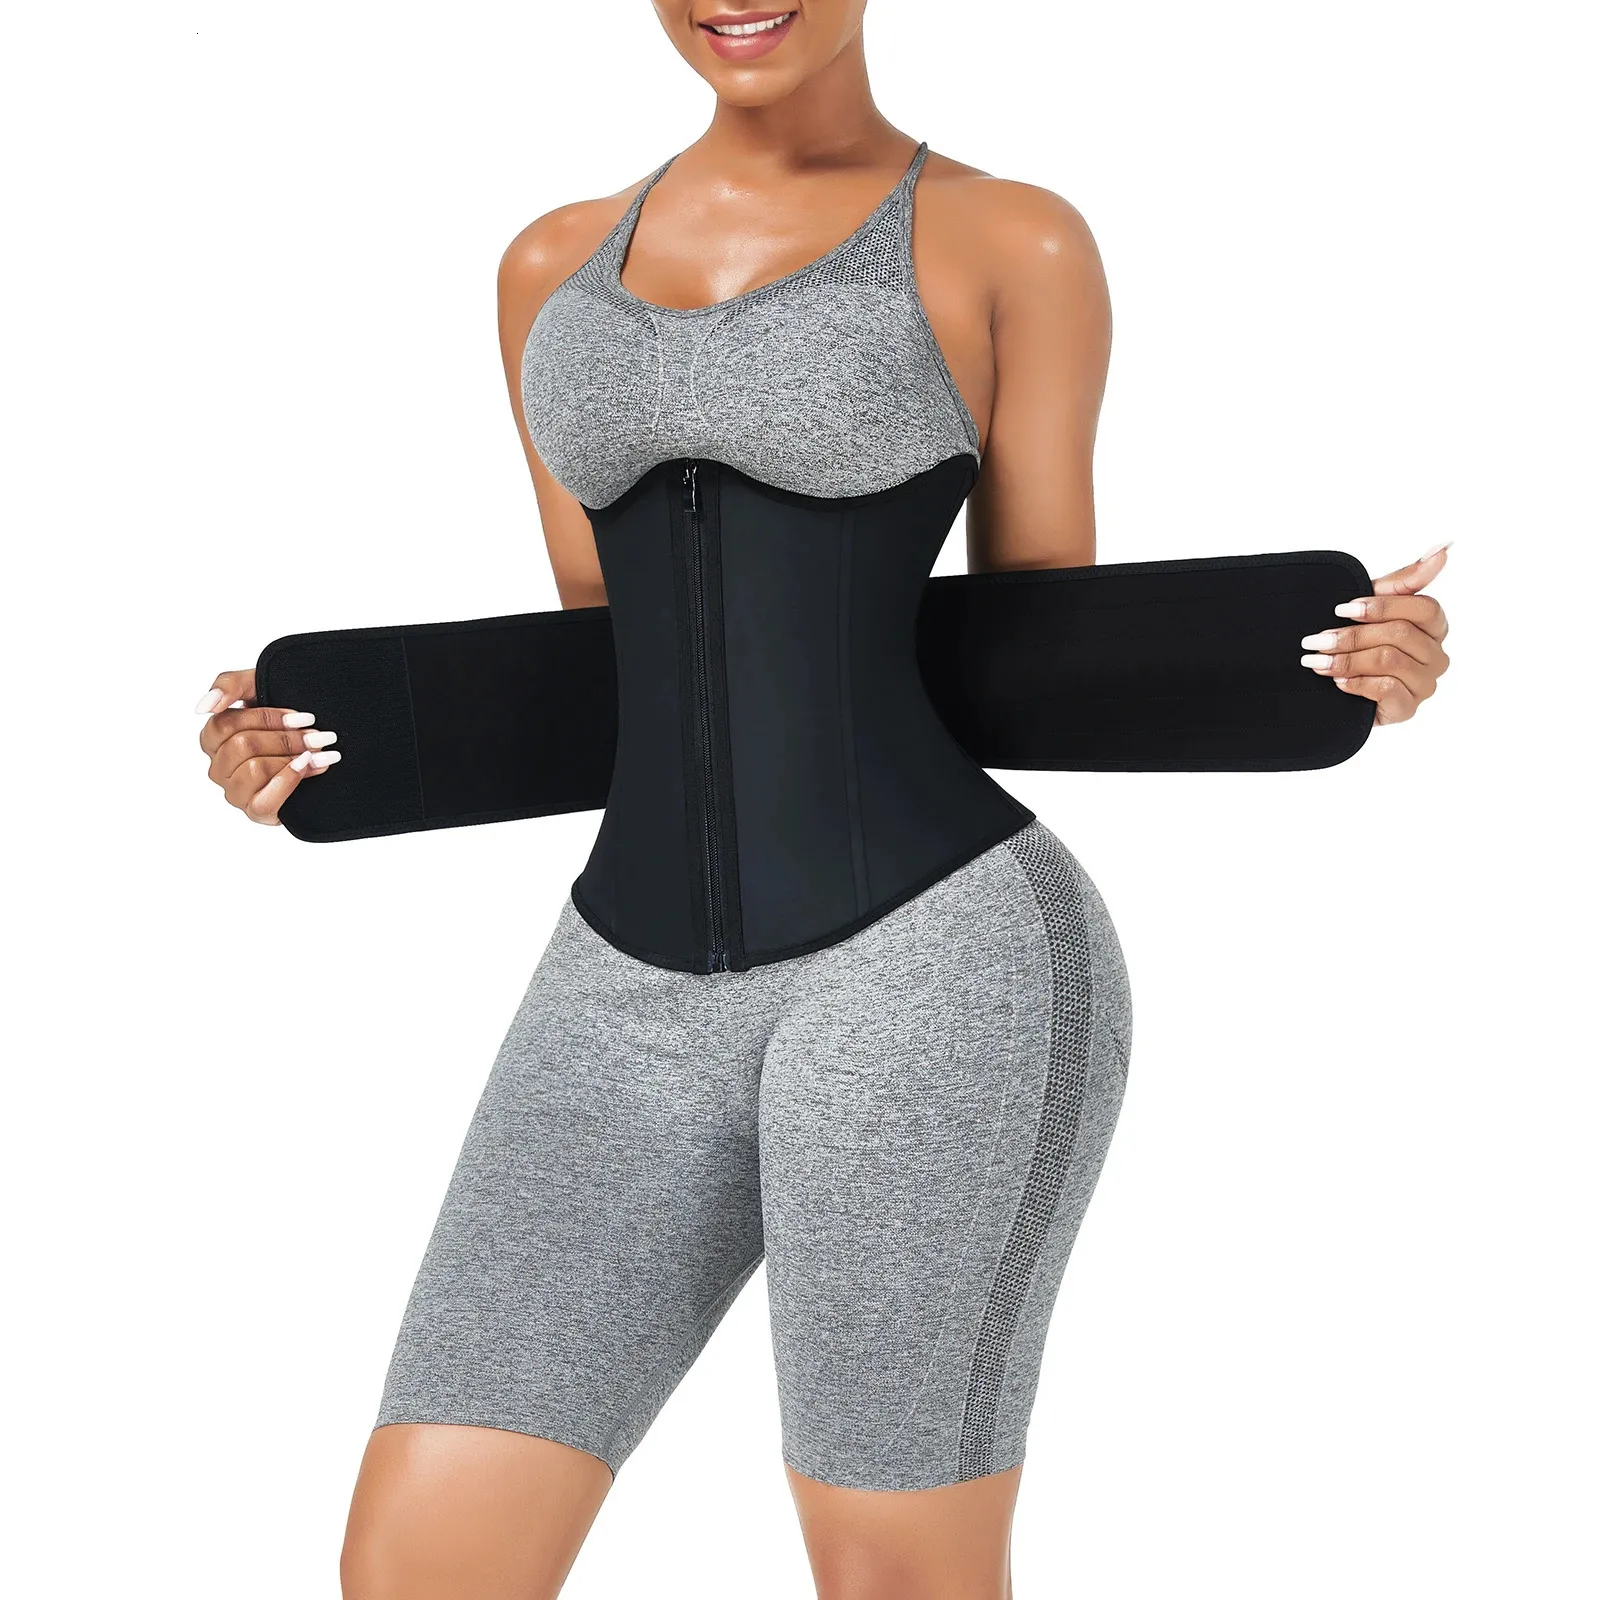 Waist Tummy Shaper Fajas Colombianas Trainer Women Black Bust Support Latex  Trimmer Control Shapers Body 231213 From Ren04, $28.86